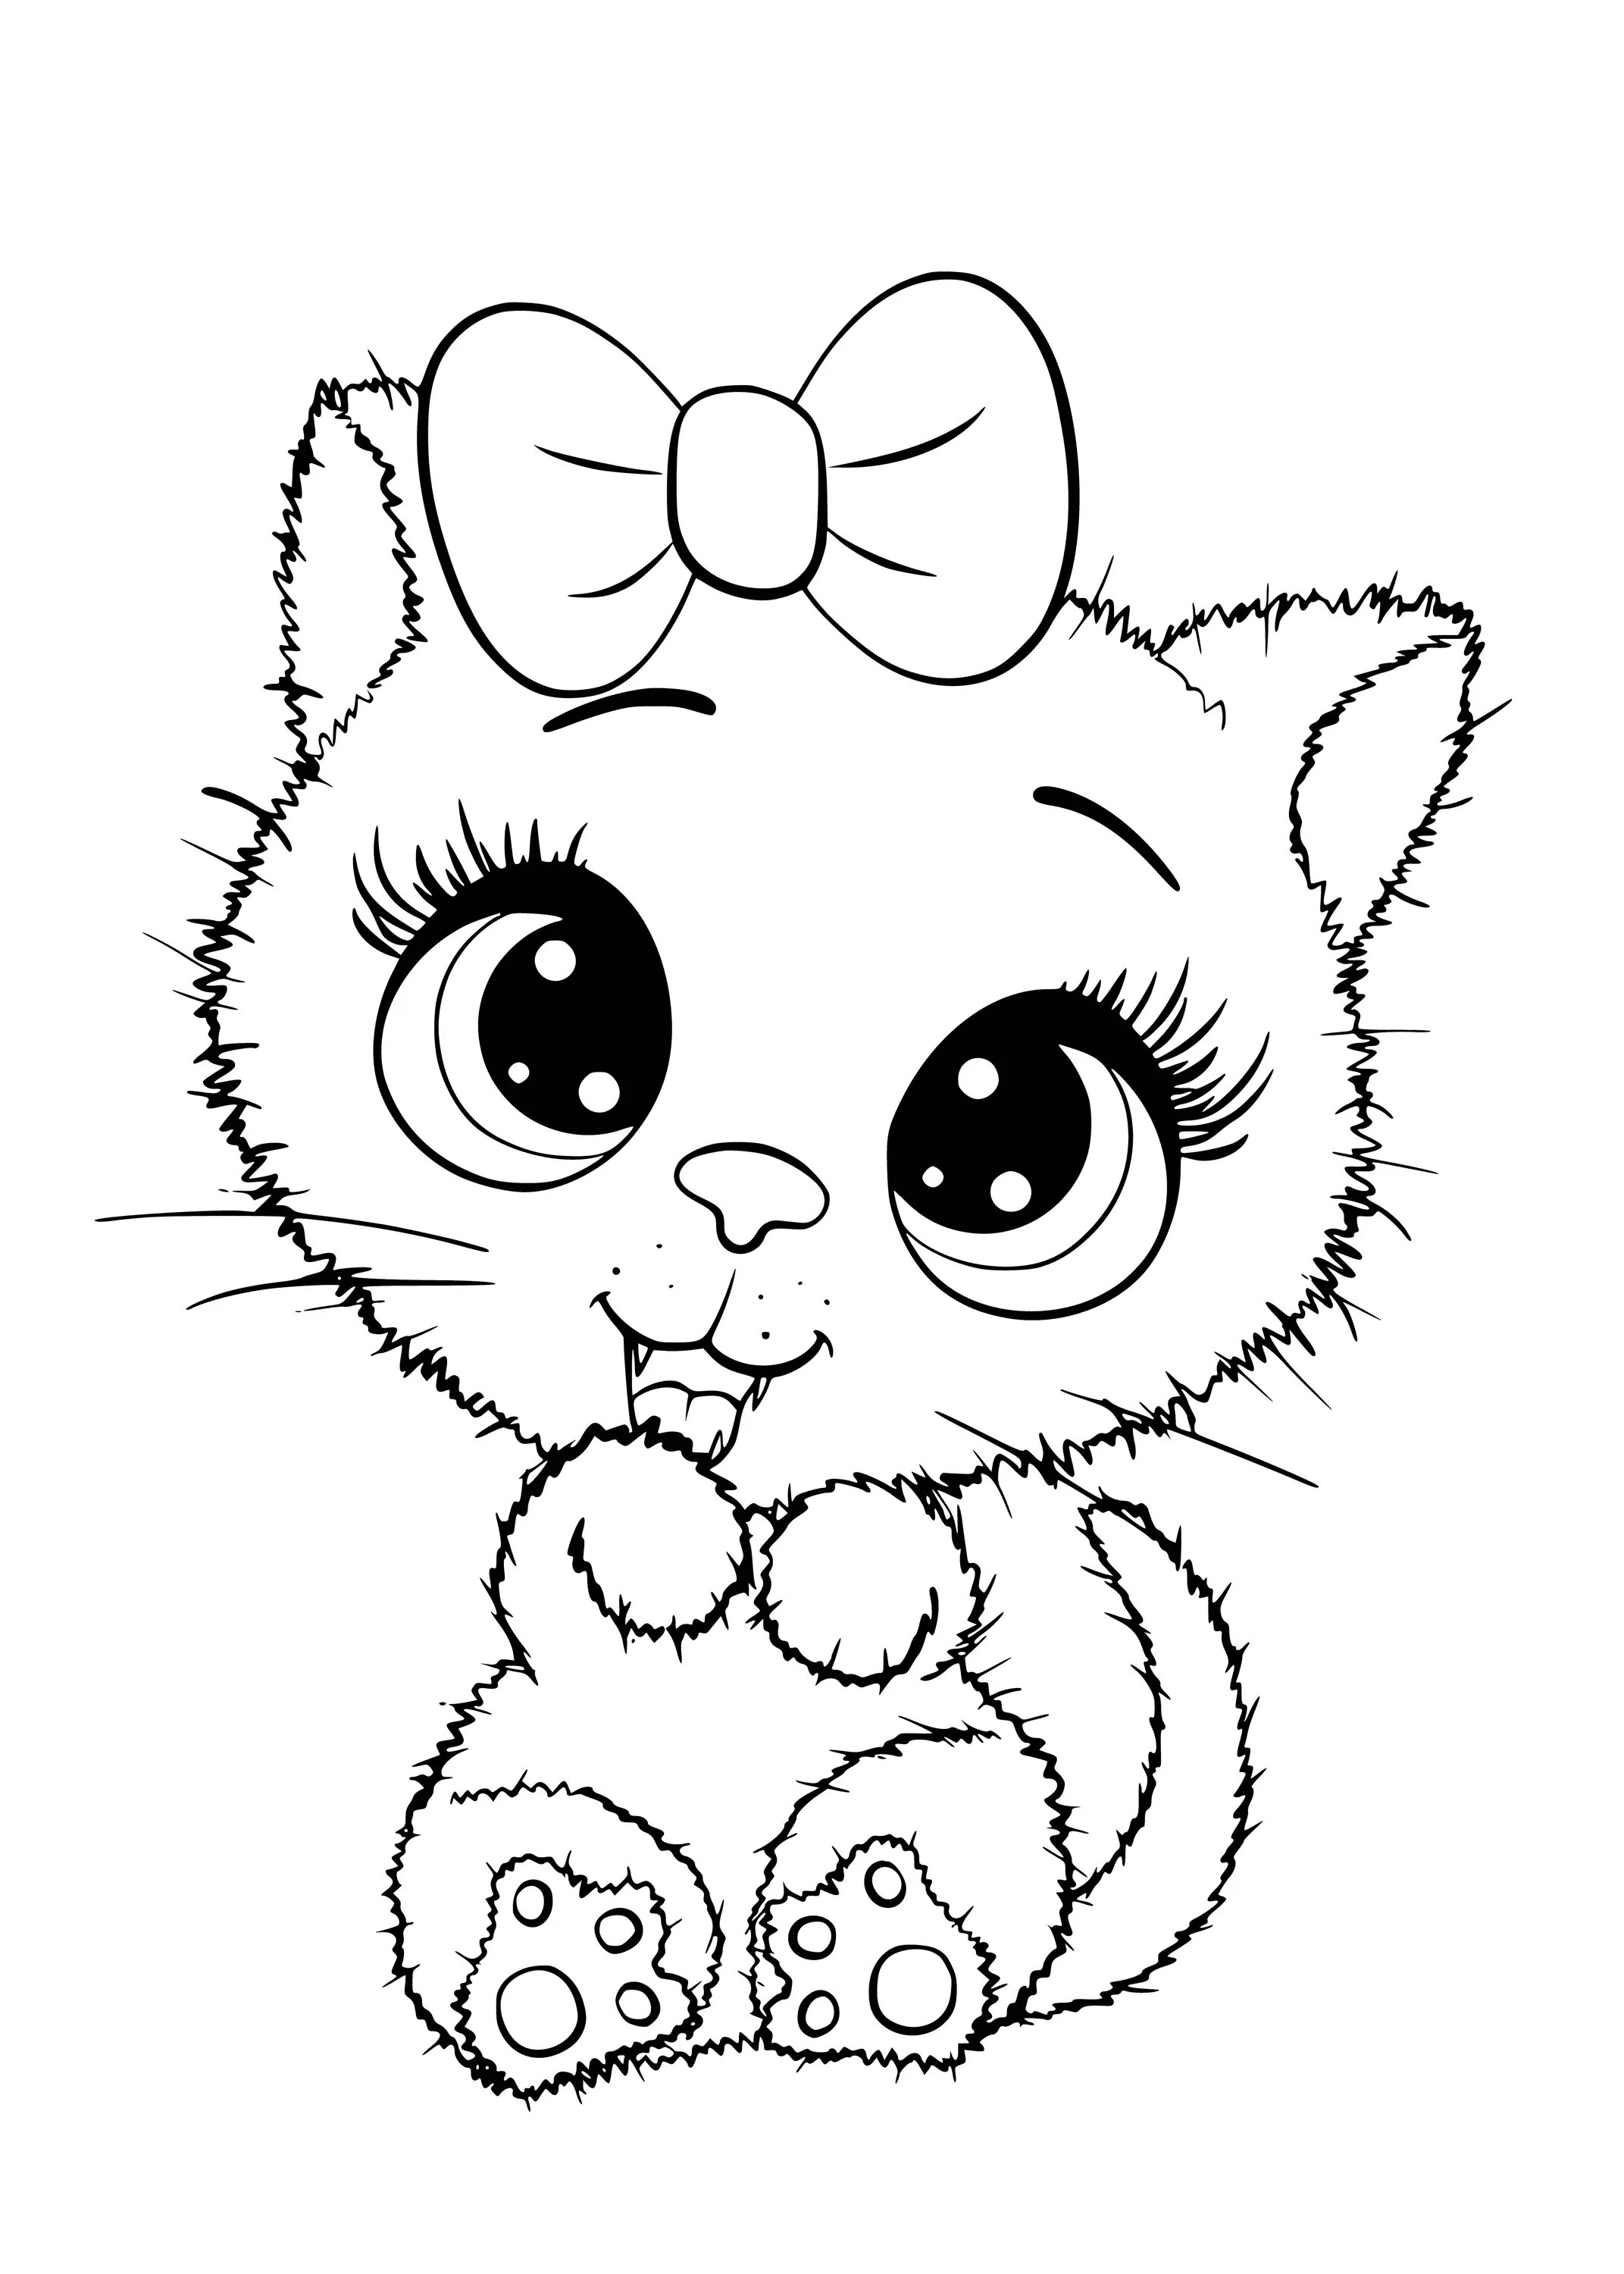 Adorable and mischievous cat coloring book for kids